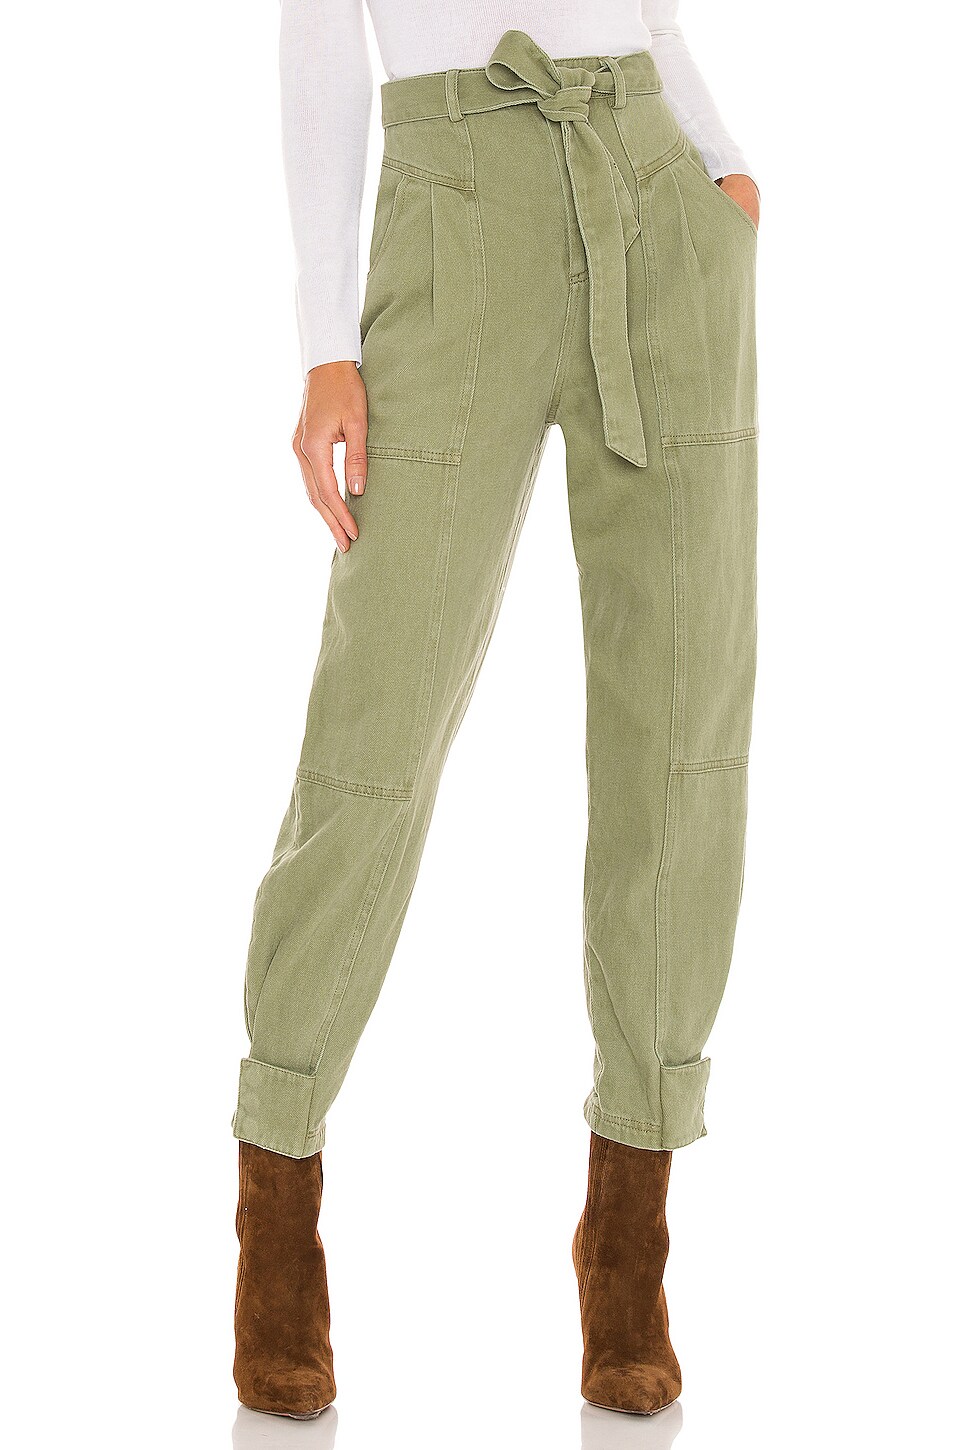 Tularosa Belted Pant in Green | REVOLVE